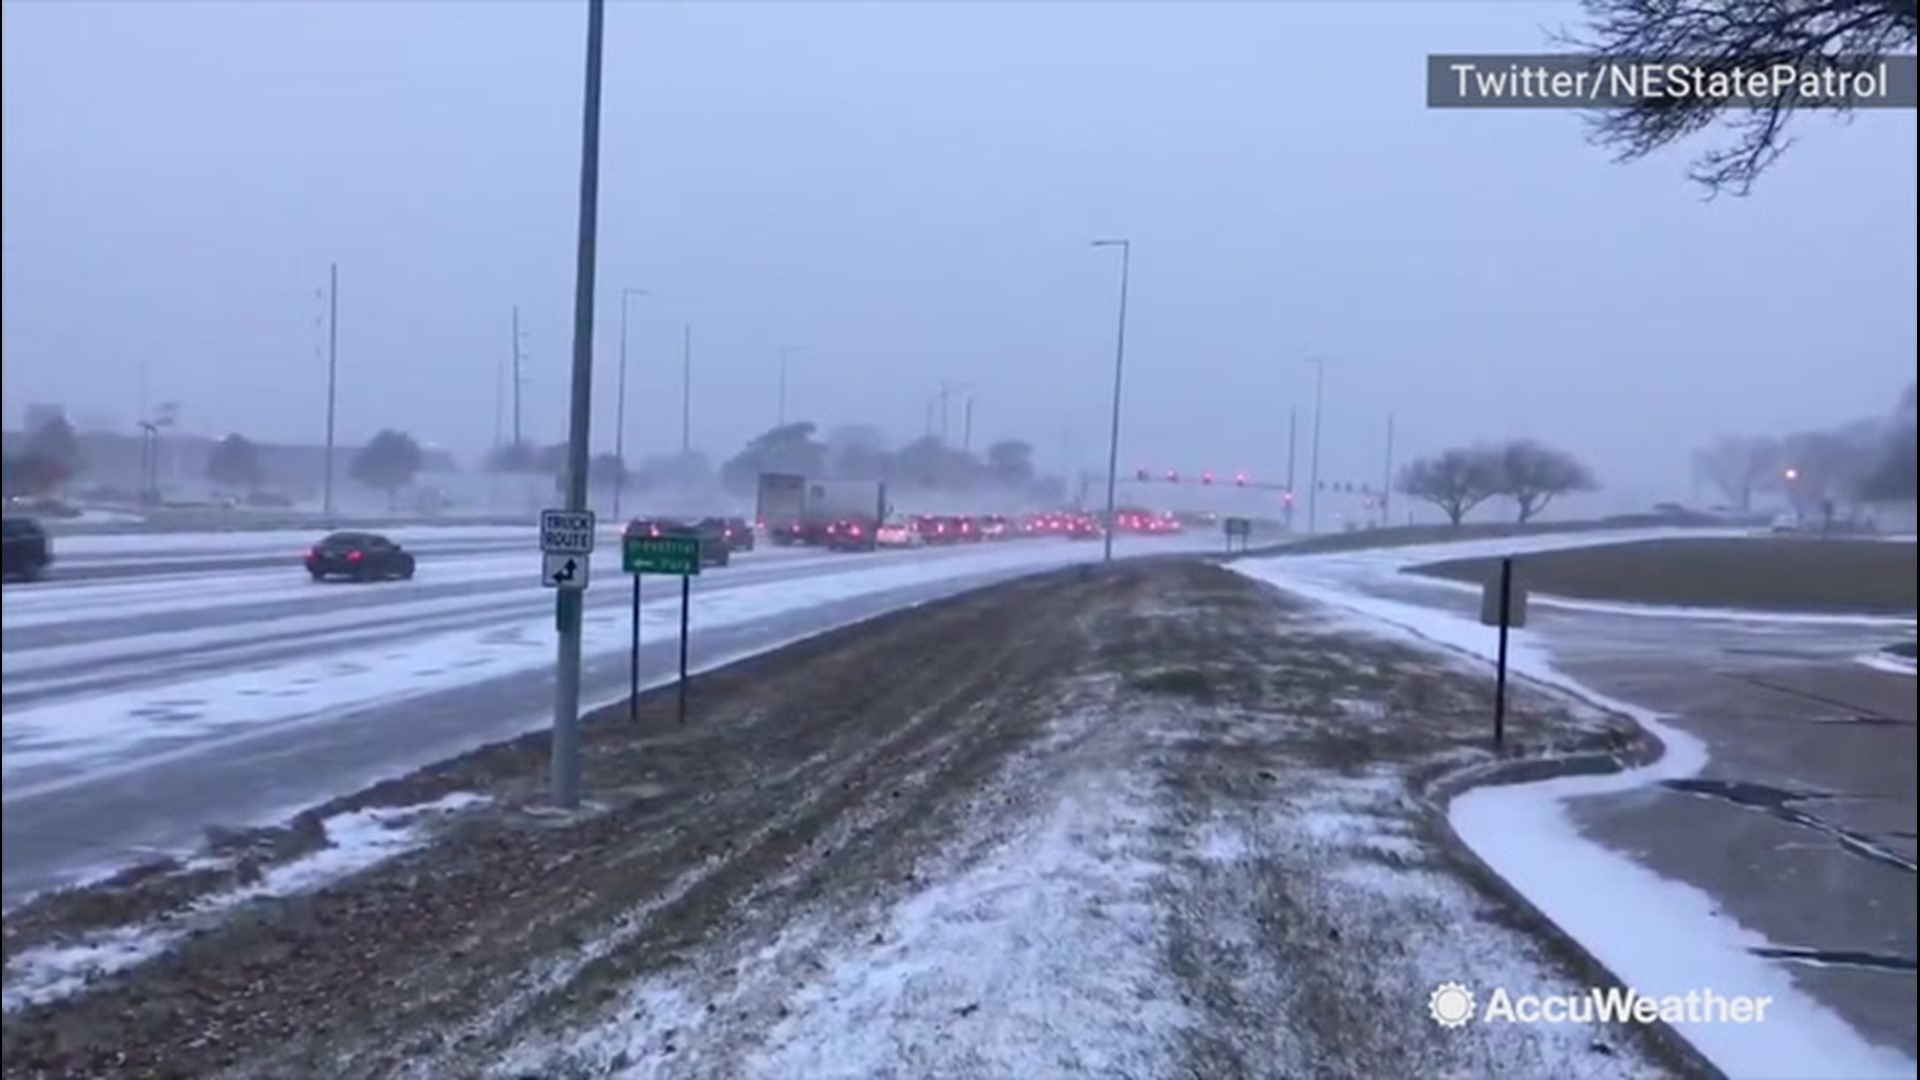 A bitter snow band swept through Lincoln, Nebraska, on Dec. 9, bringing winds of up to 48 mph. It forced traffic in this video into a complete stop.